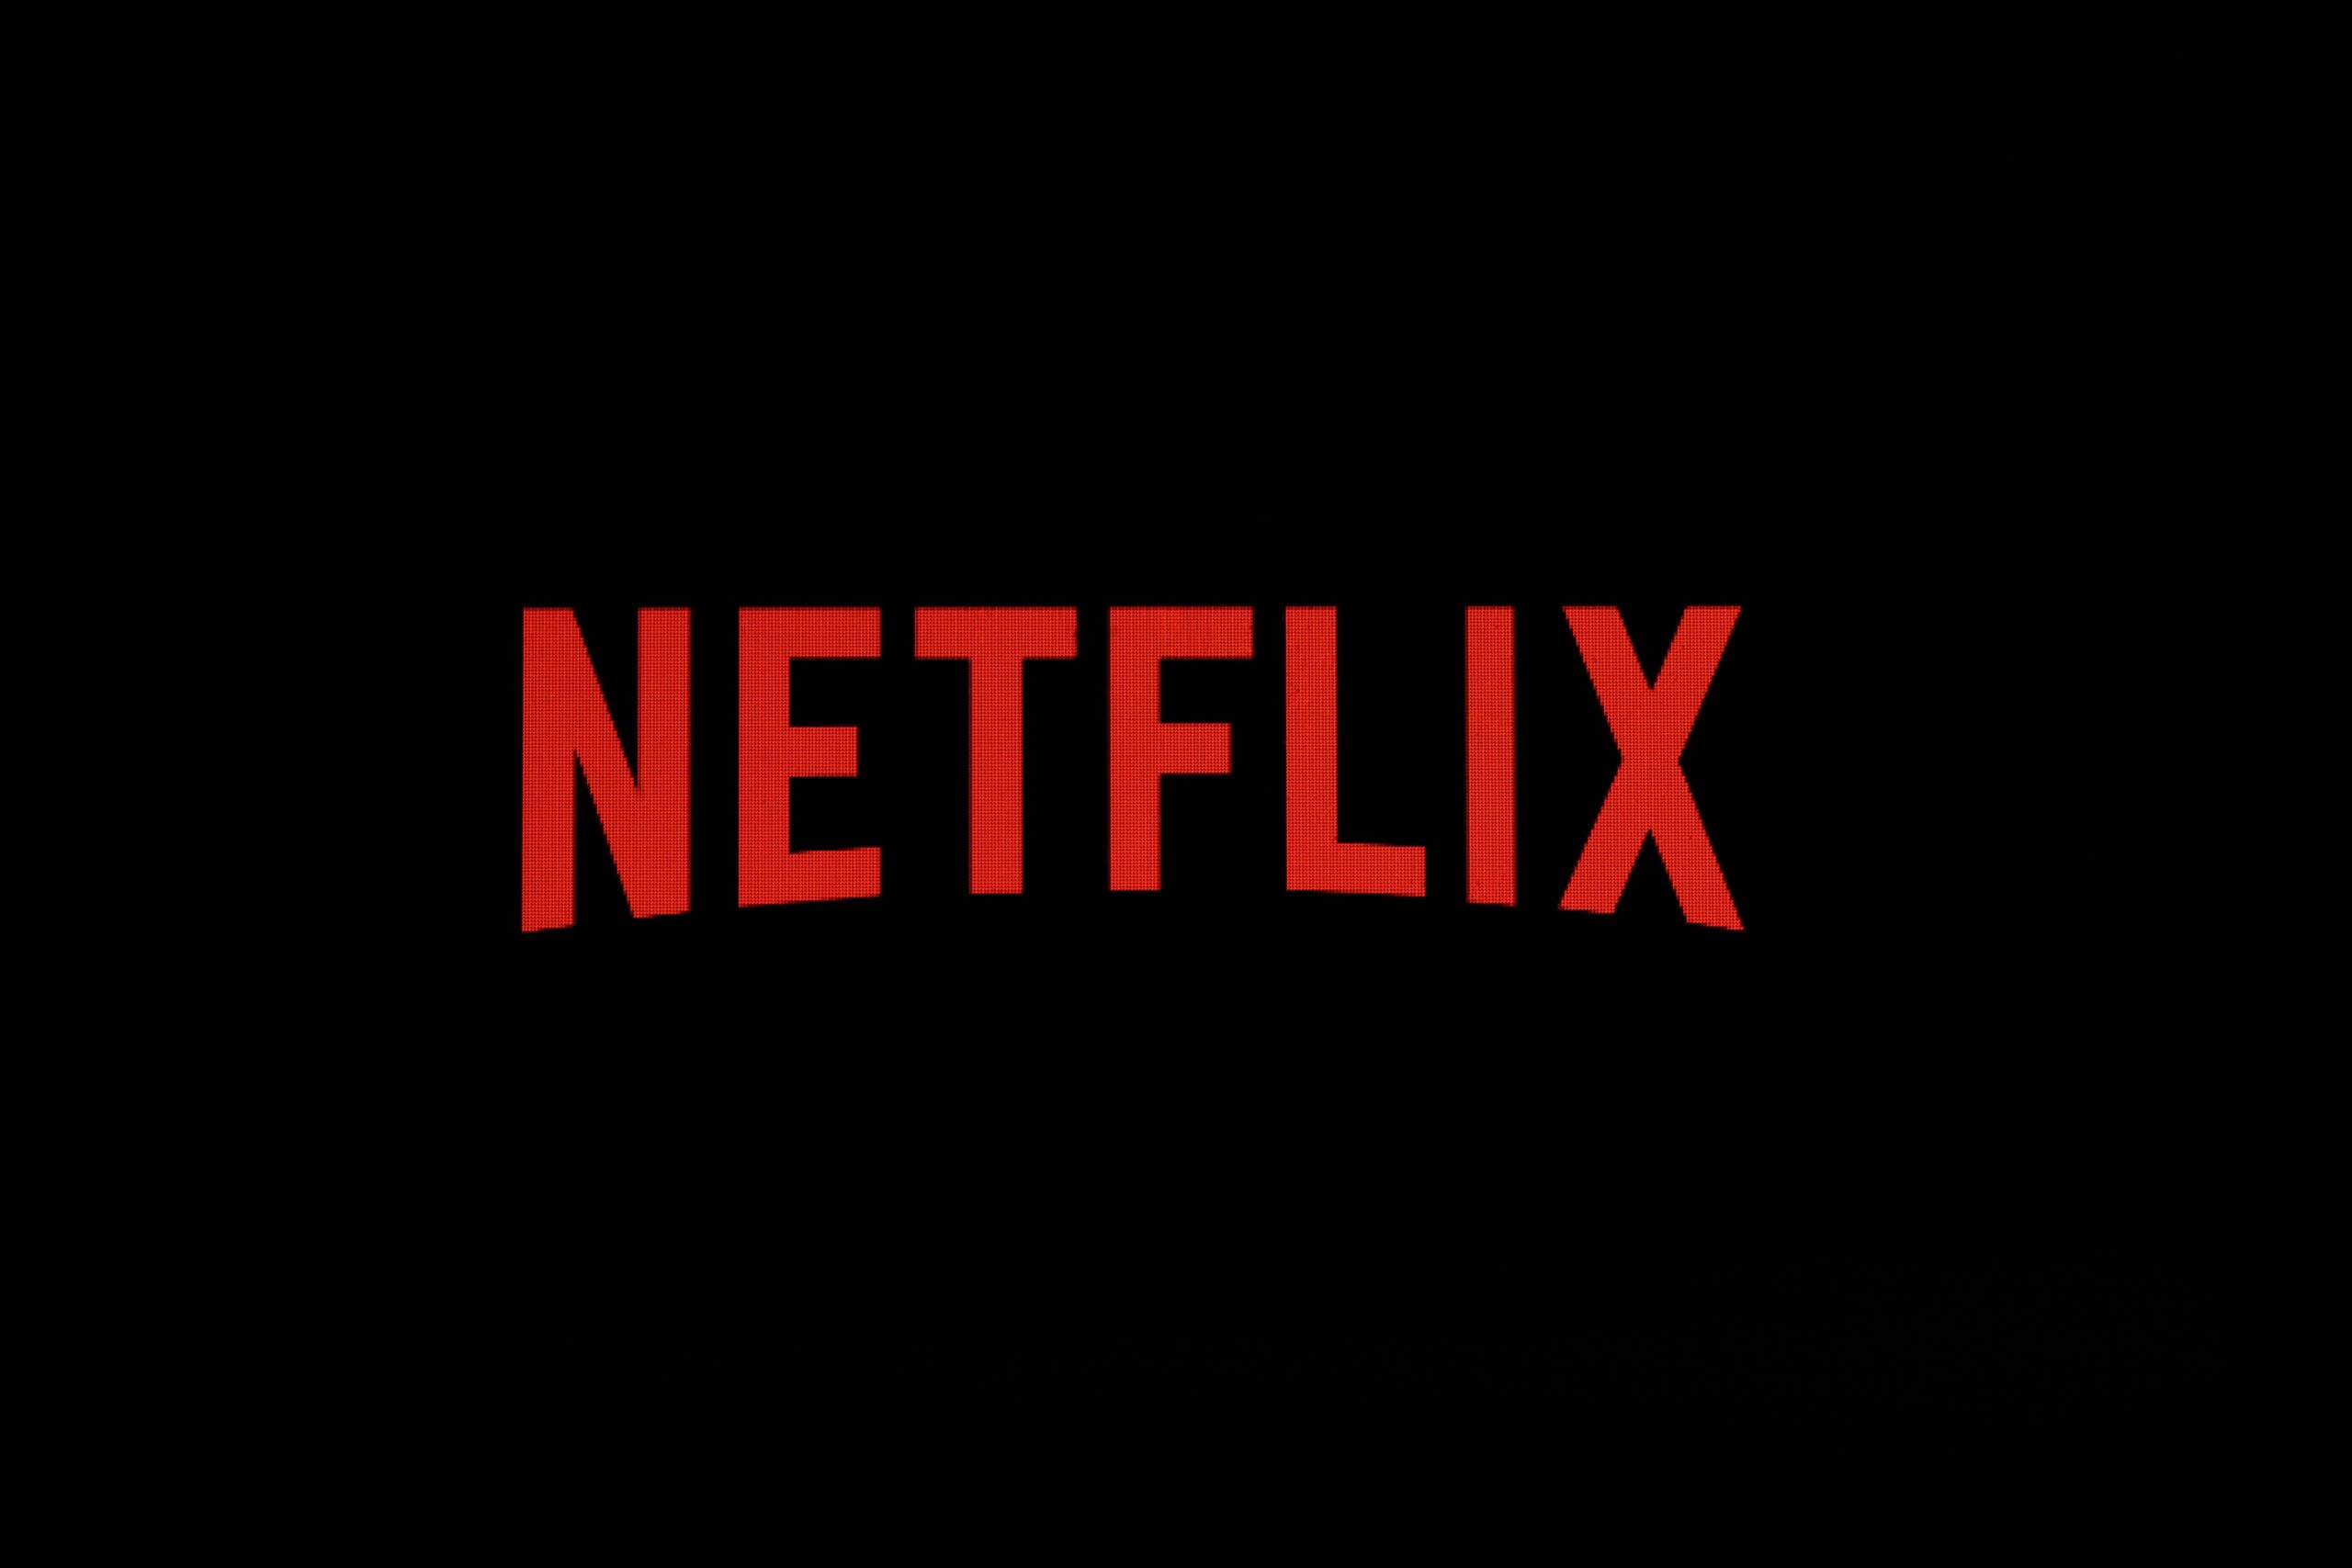 Study reveals which country has the best Netflix content – and America’s not even close